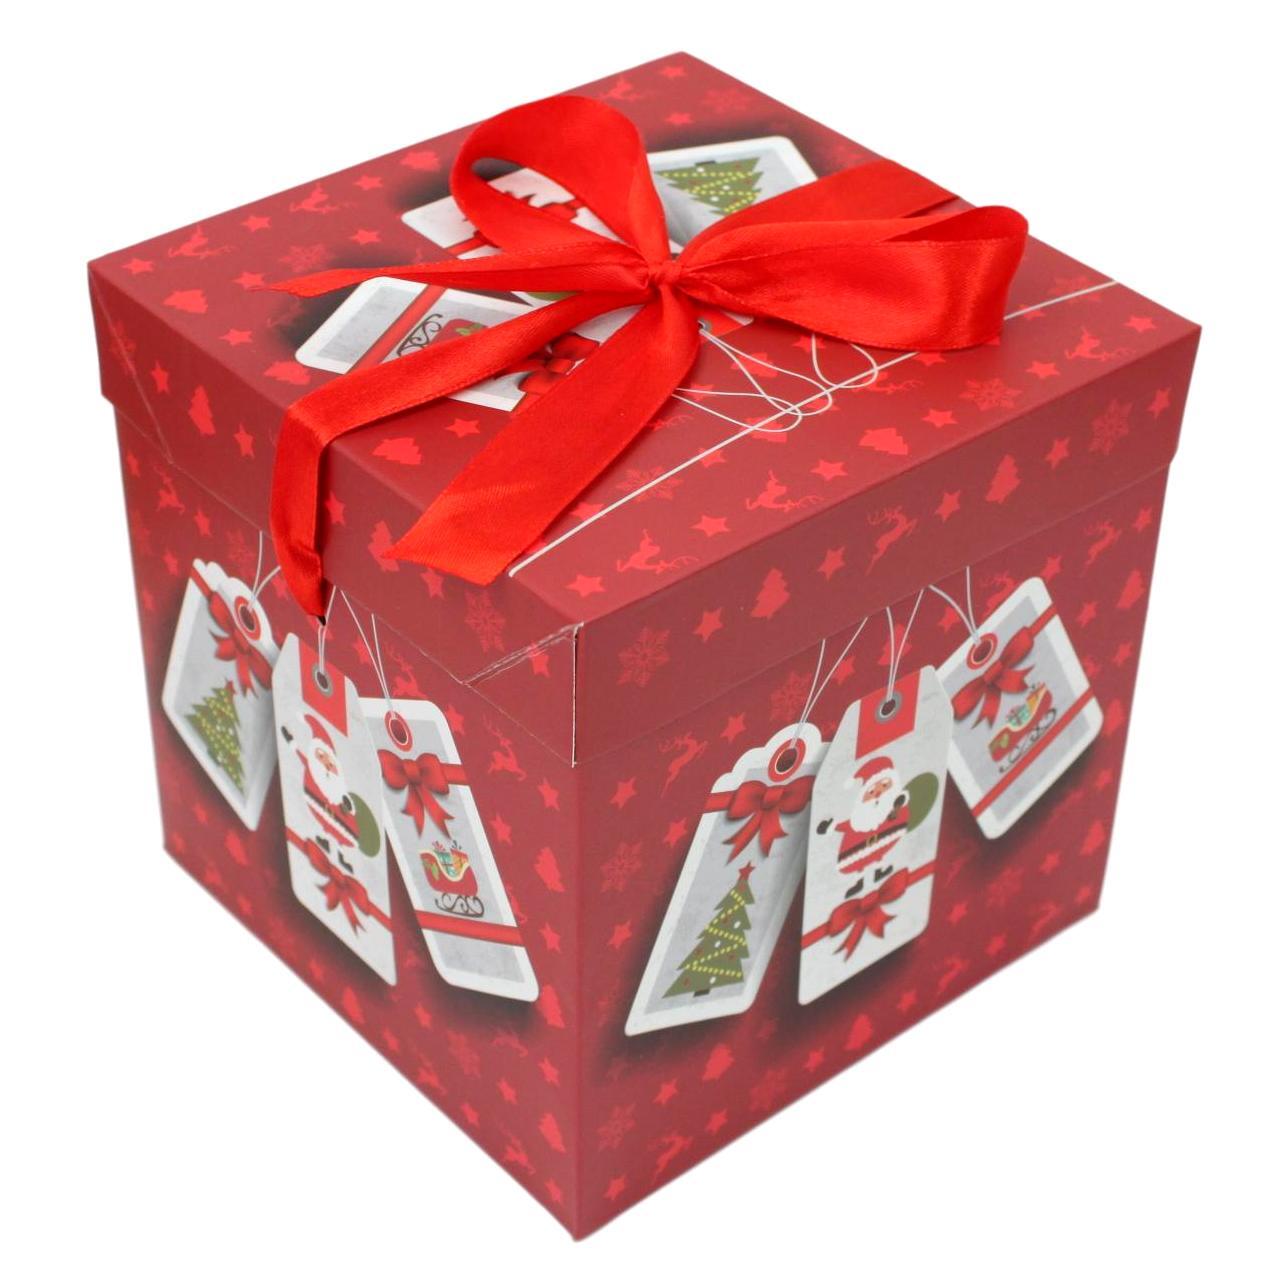 Gift Boxes For Friends Christmas : DIY Christmas Gift Boxes | 6 Pack ...